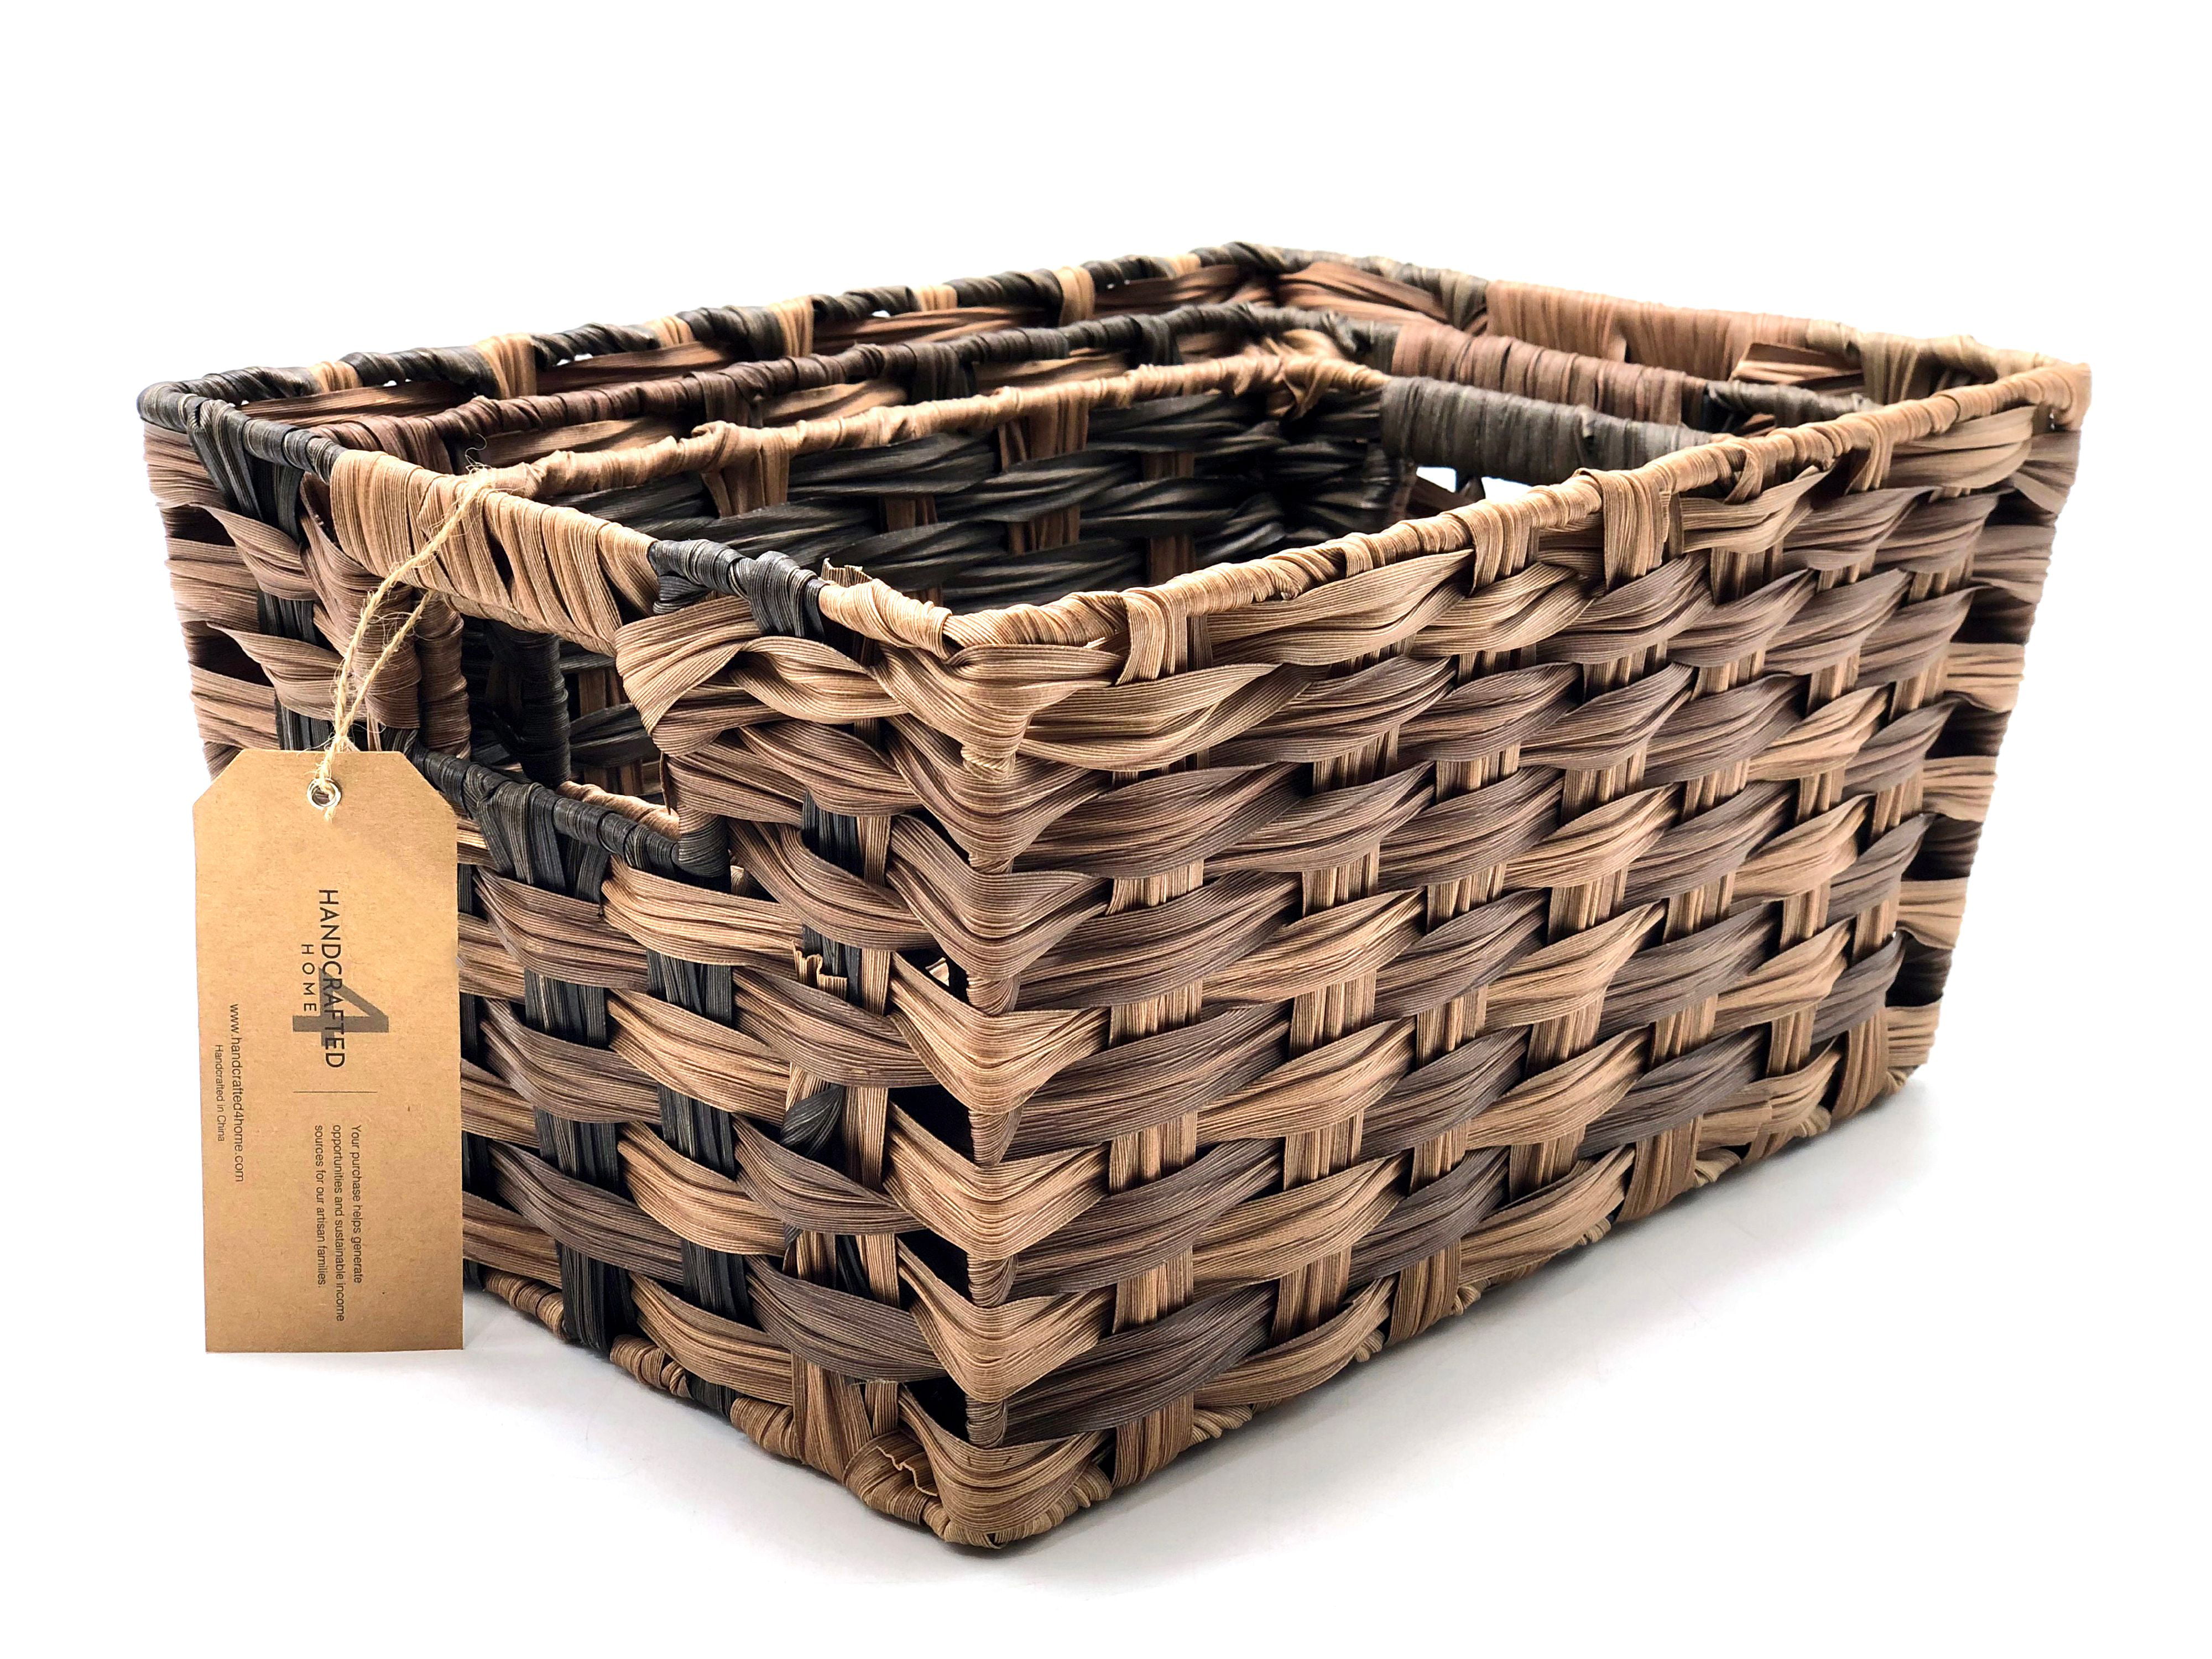 3-Piece Woven Nested Basket Set by Handcrafted 4 Home 